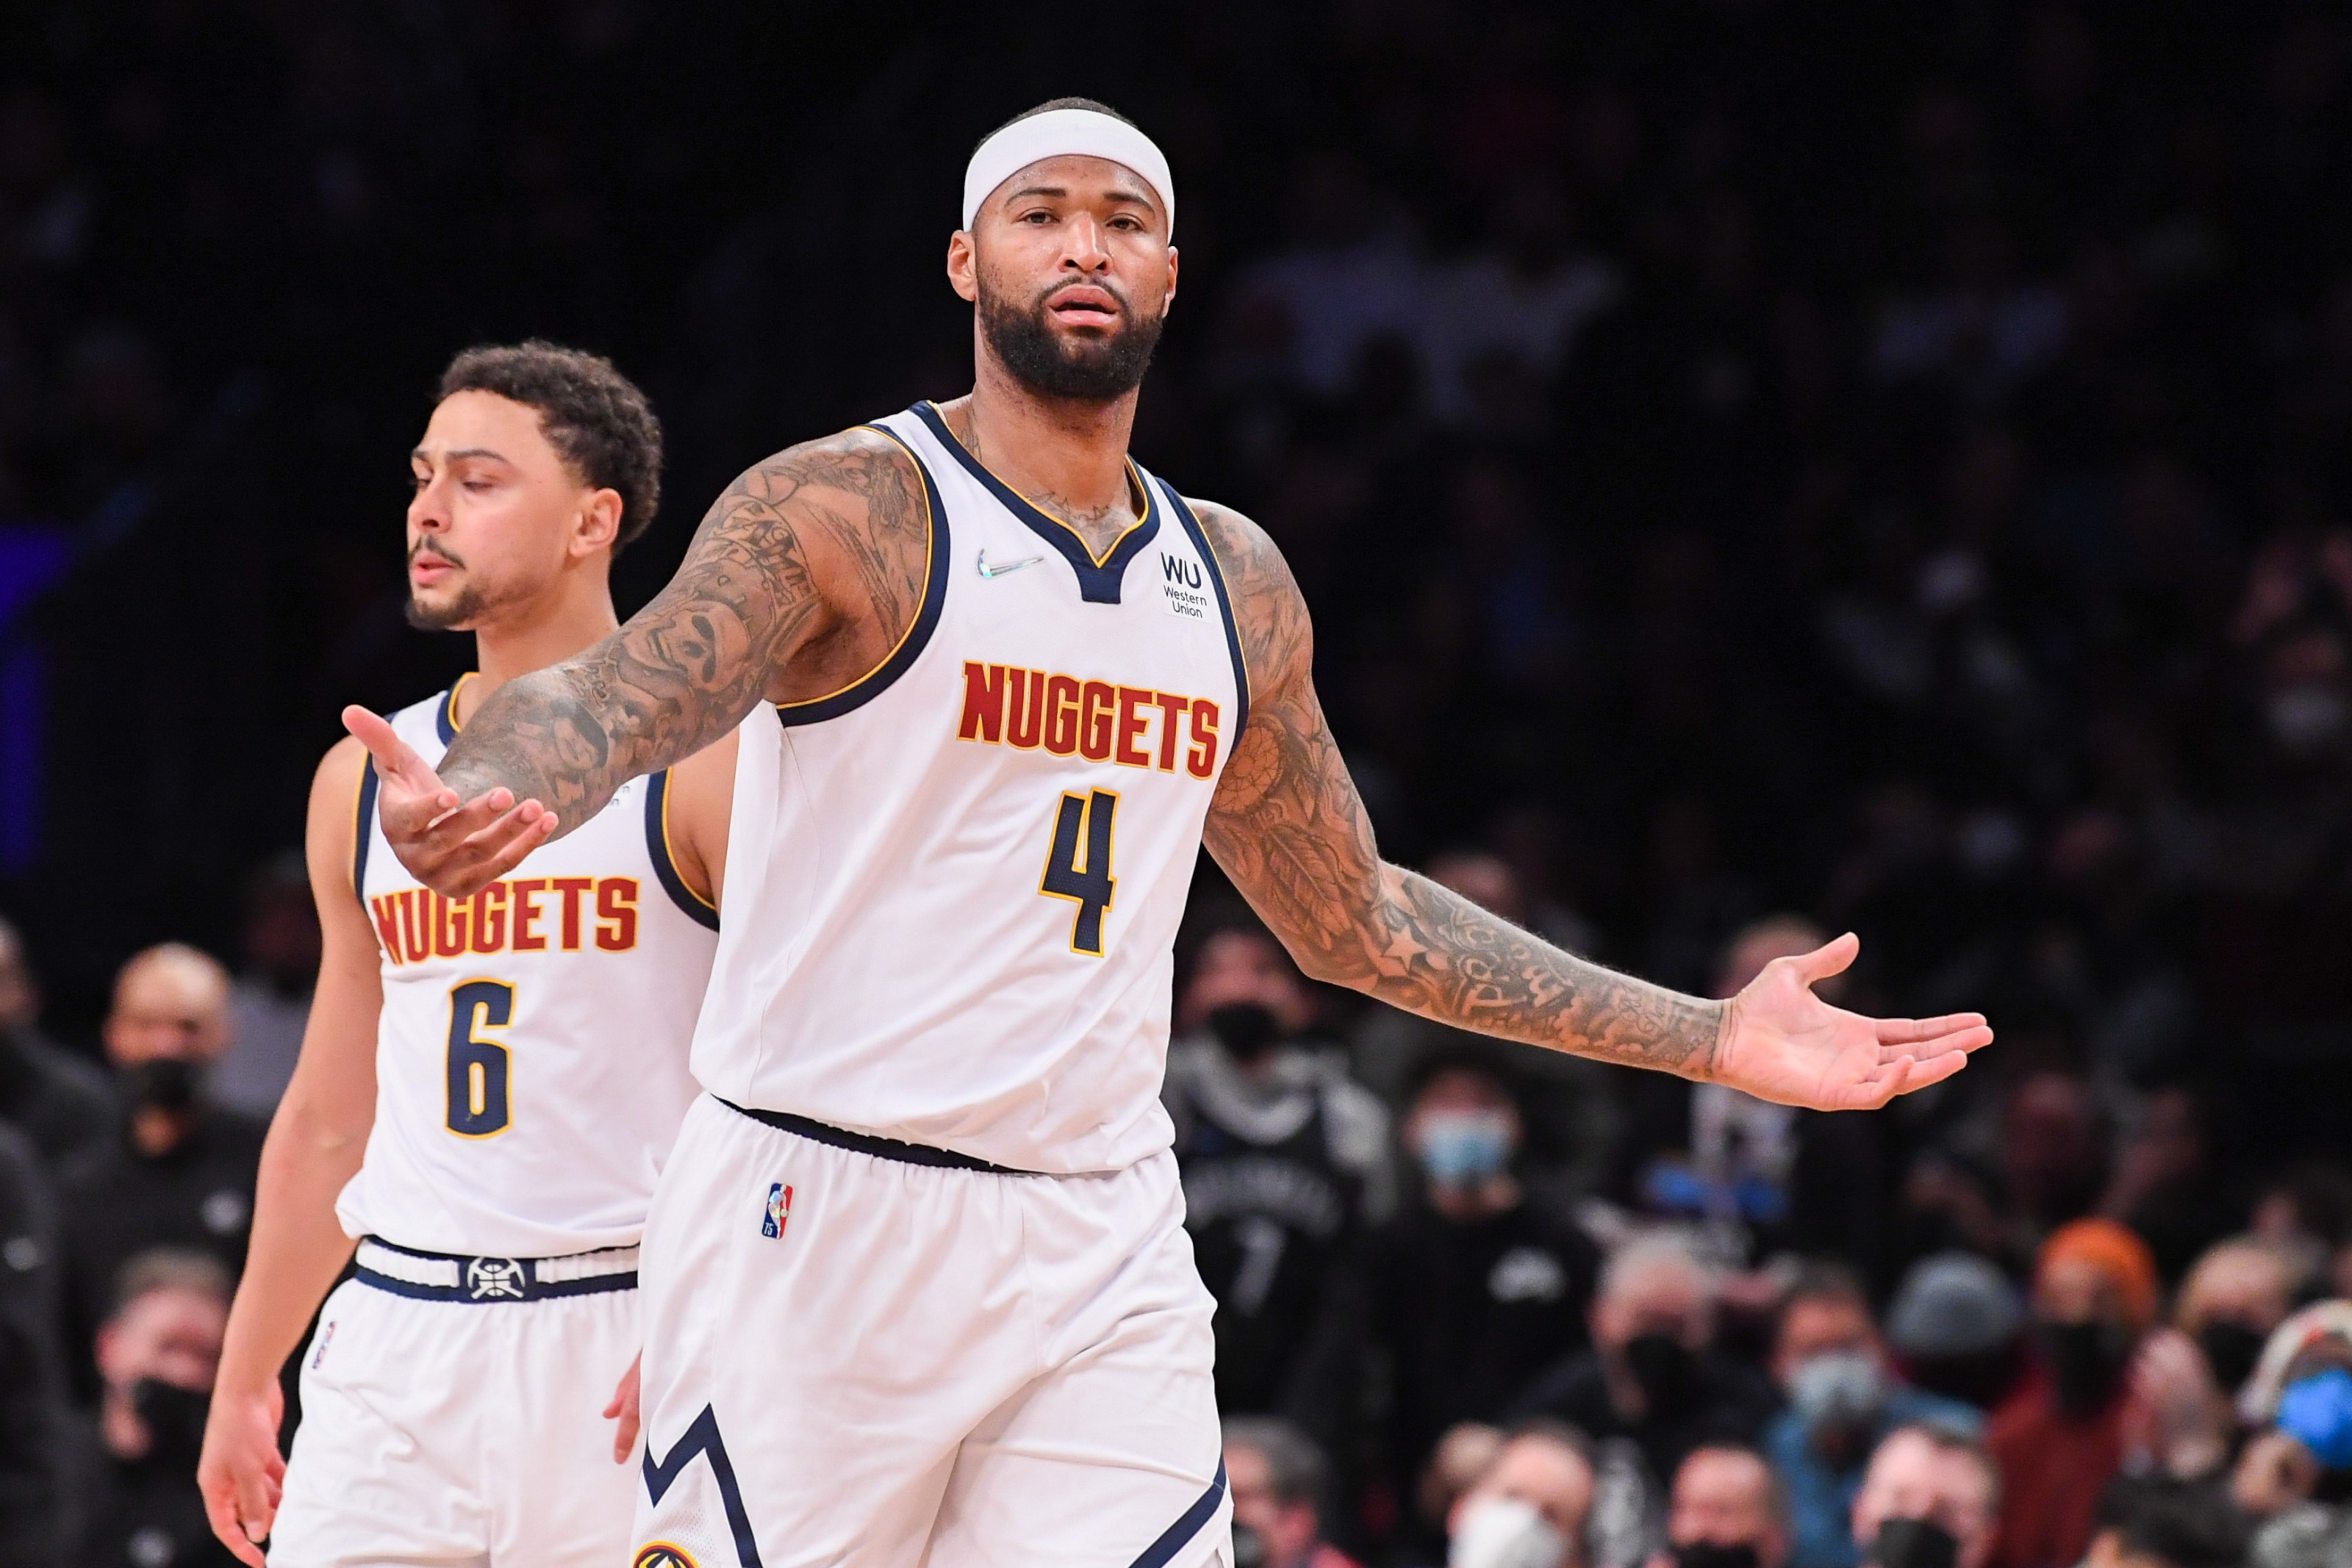 Nuggets' bench has identity in DeMarcus Cousins and JaMychal Green